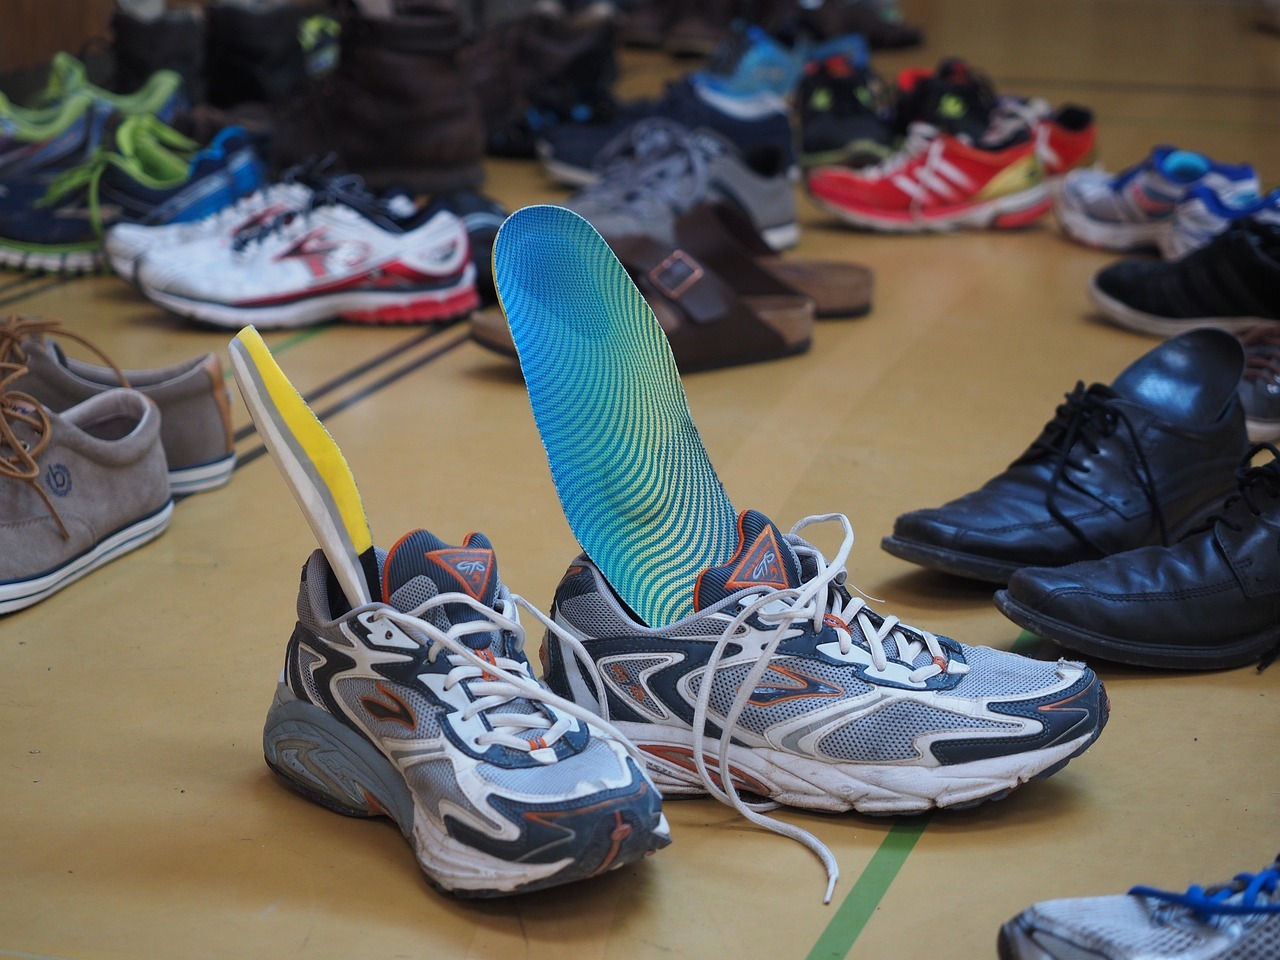 Evaluating Insole Comfort